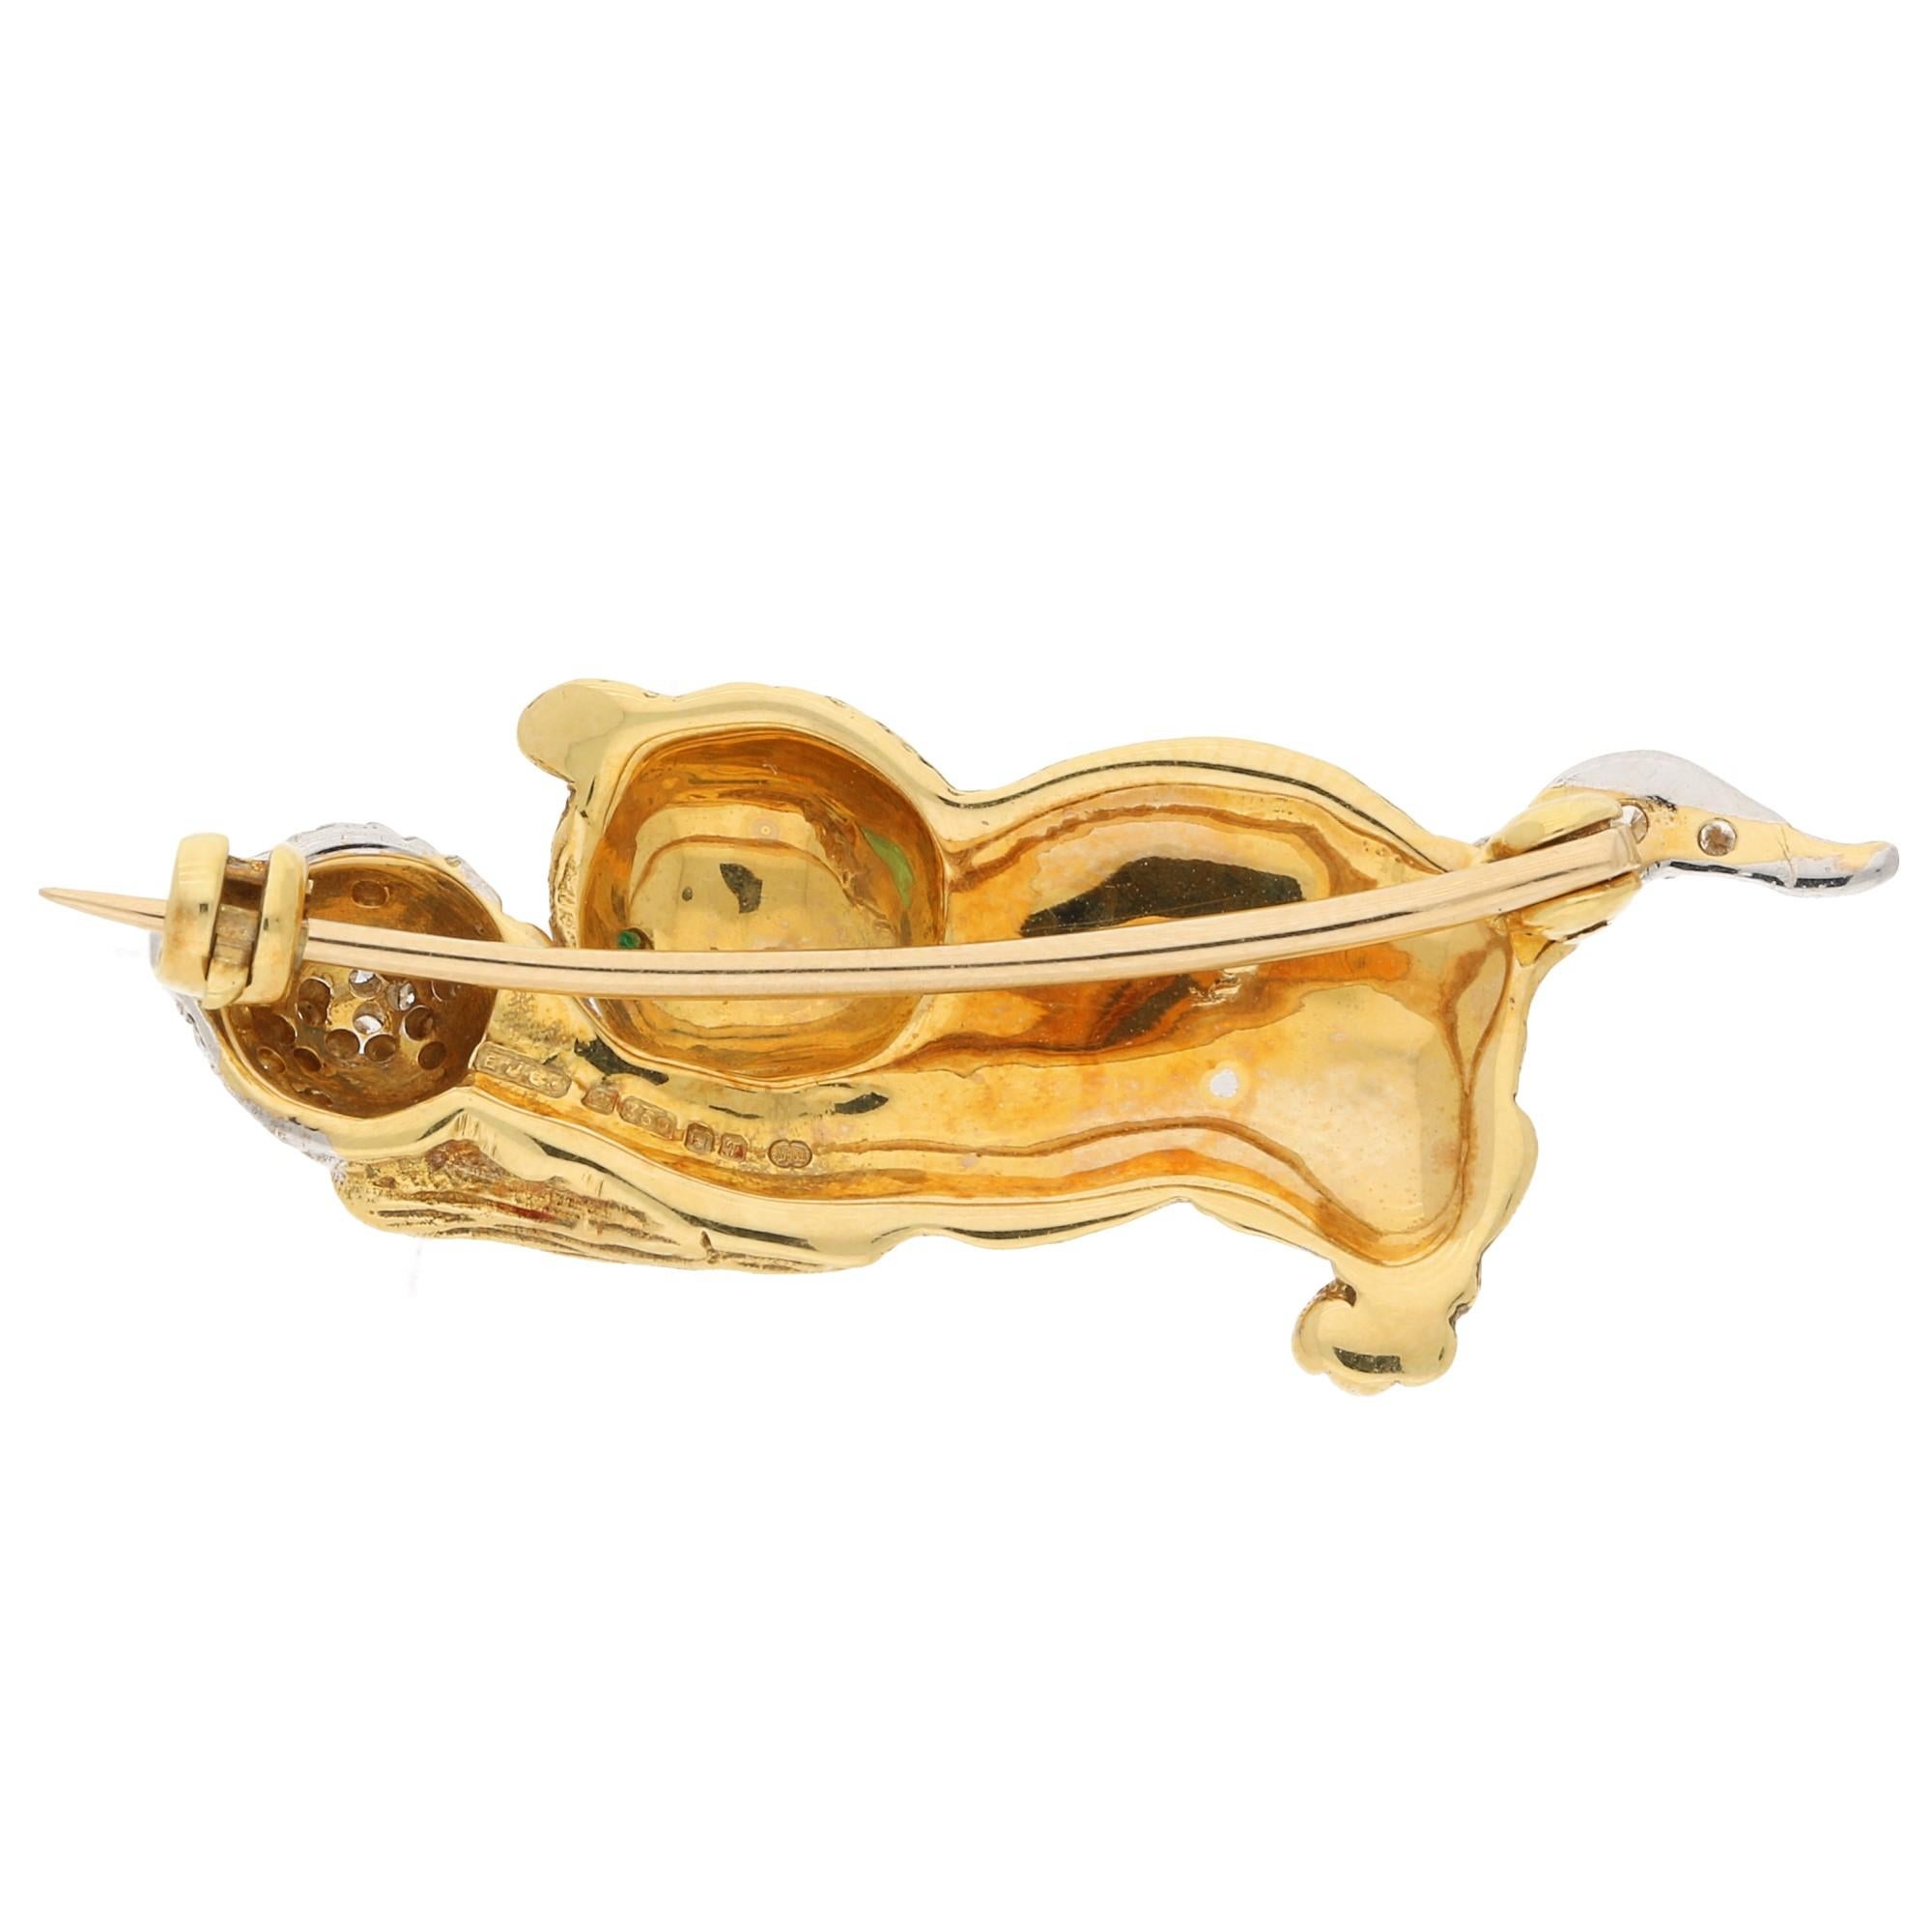 A delightful E. Wolfe & Co. vintage diamond and emerald playing cat brooch in 18-karat yellow and white gold, circa 1993. The brooch is designed as a cat playing with a ball, the cat displaying a hand-finished carved fur effect to the yellow gold